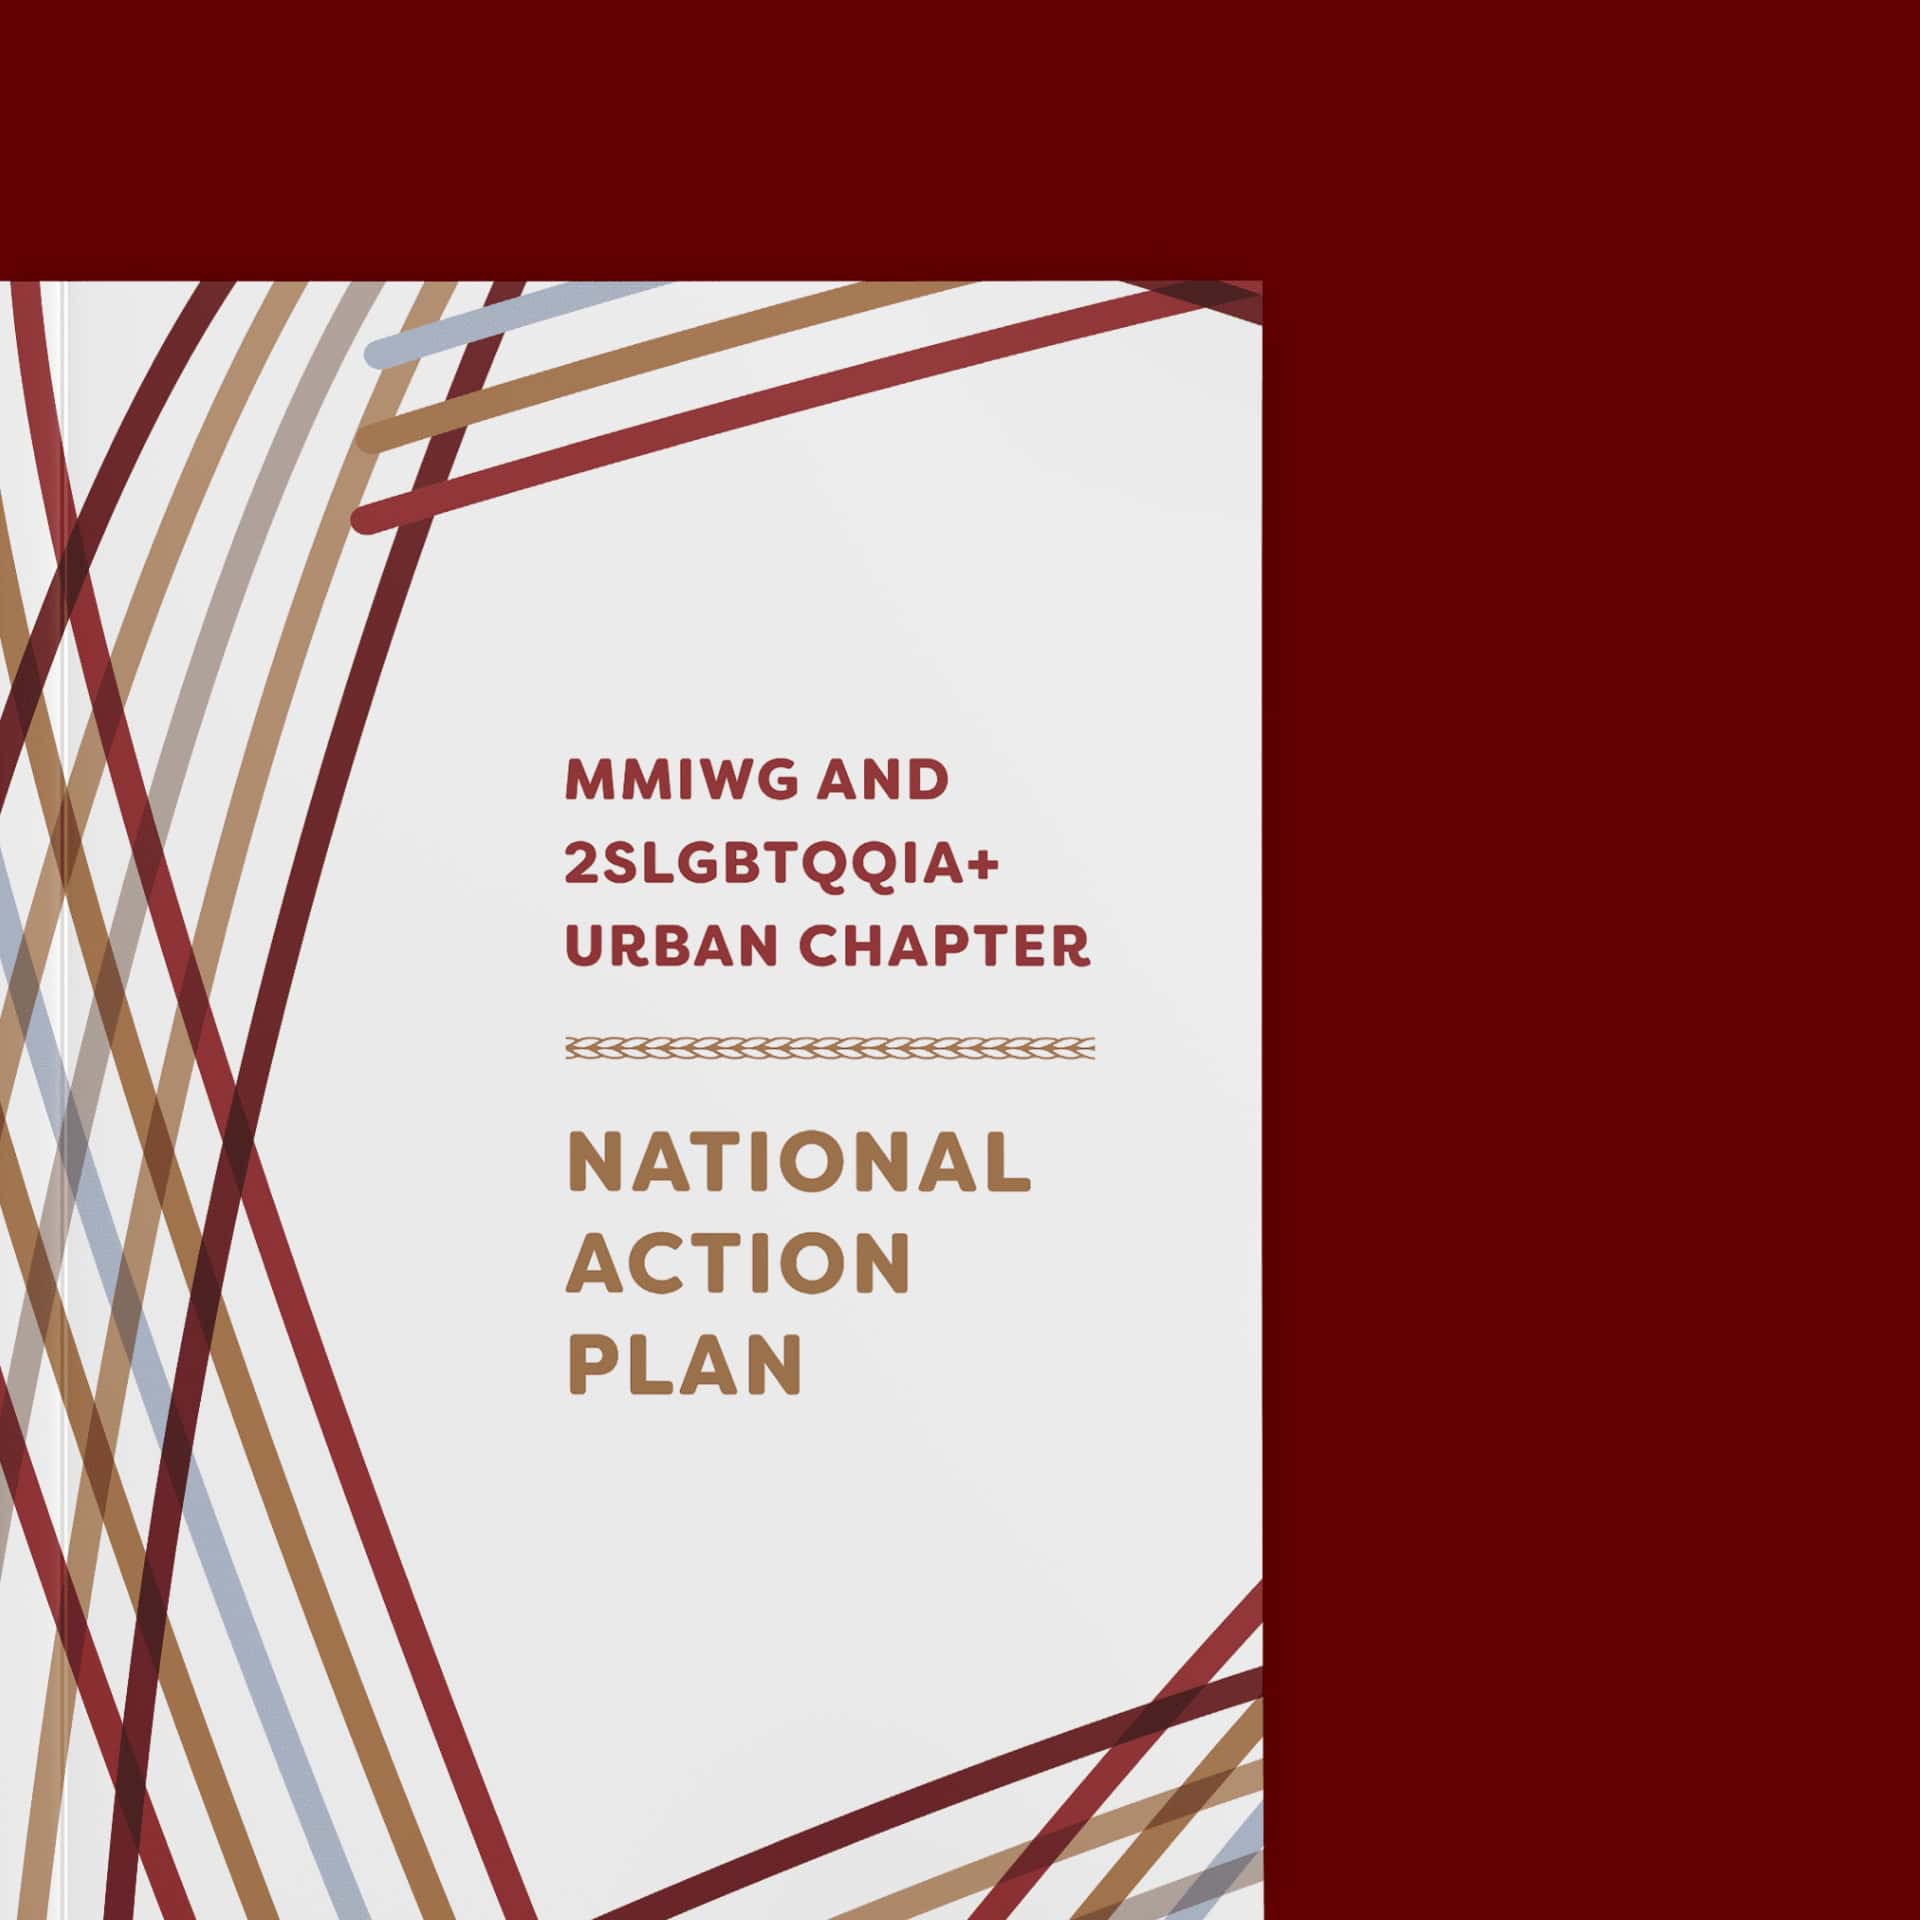 The cover for the MMIWG and 2SLGBTQQIA+ Urban Chapter National Action Plan booklet. The cover is white and features several intersecting lines in red, gold, grey, and baby blue.